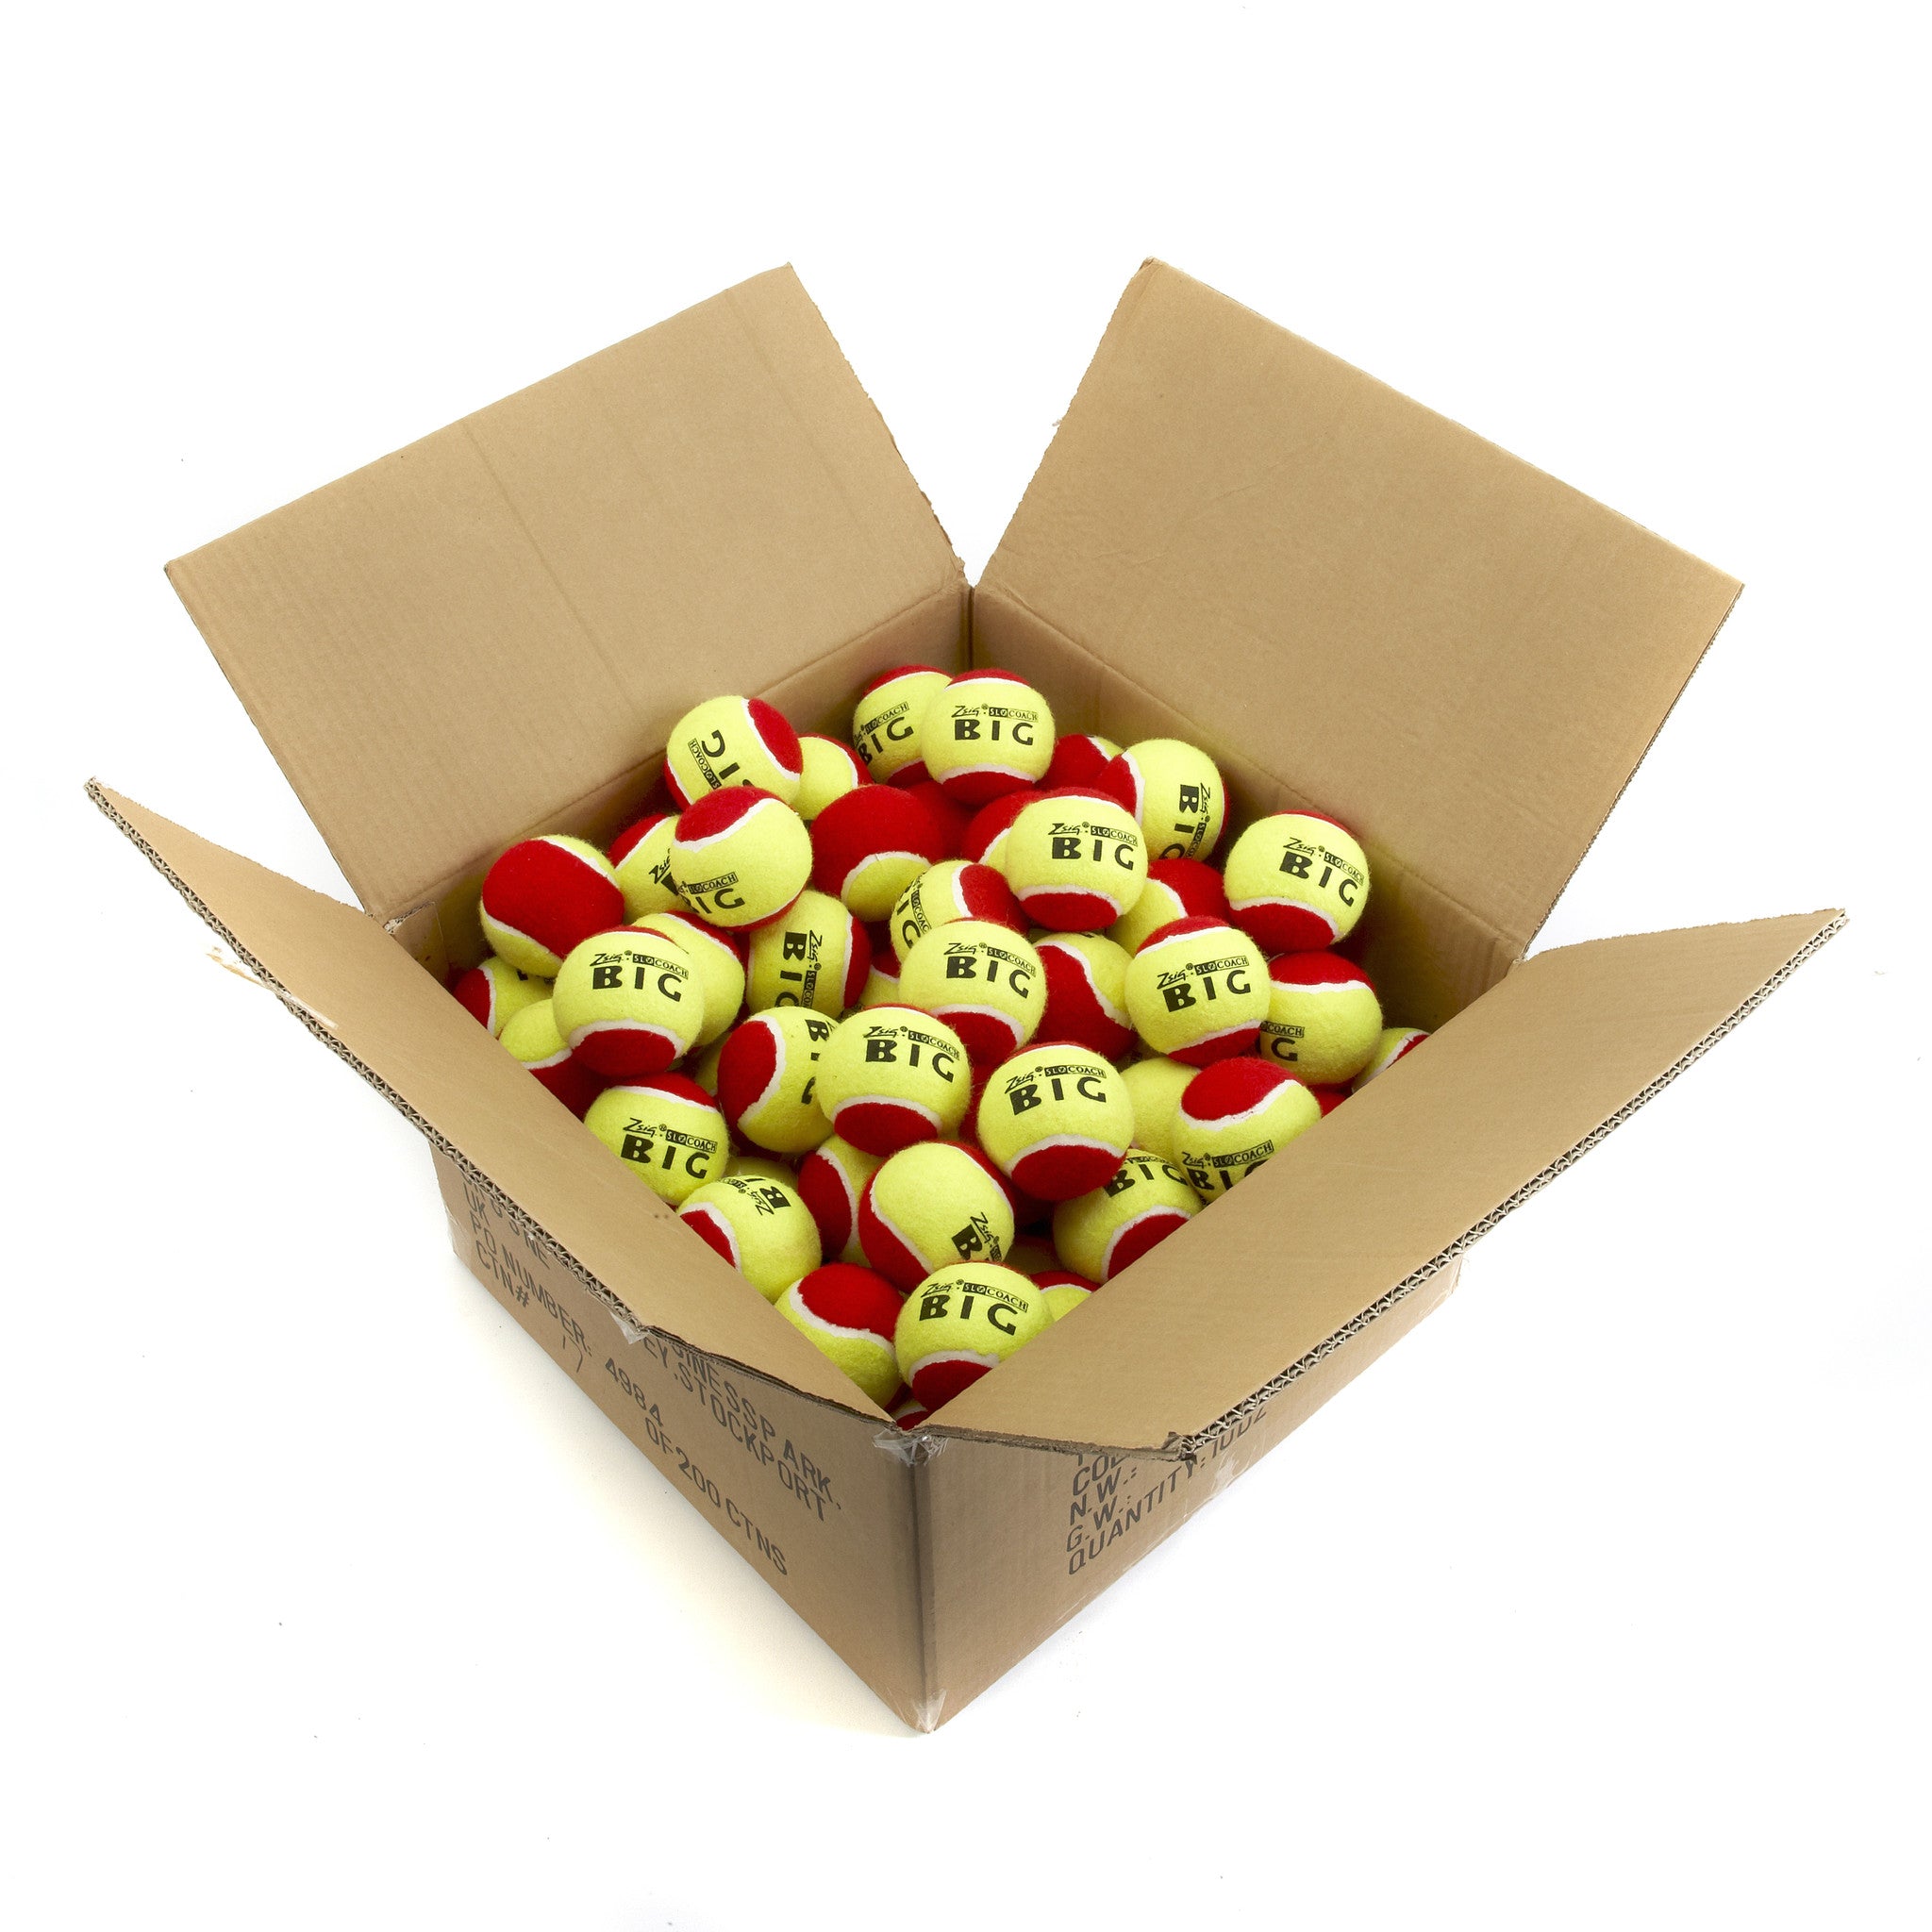 Mini Tennis Balls carton of 120 Slocoach Big Red balls for Stage 3 & Red Coaching